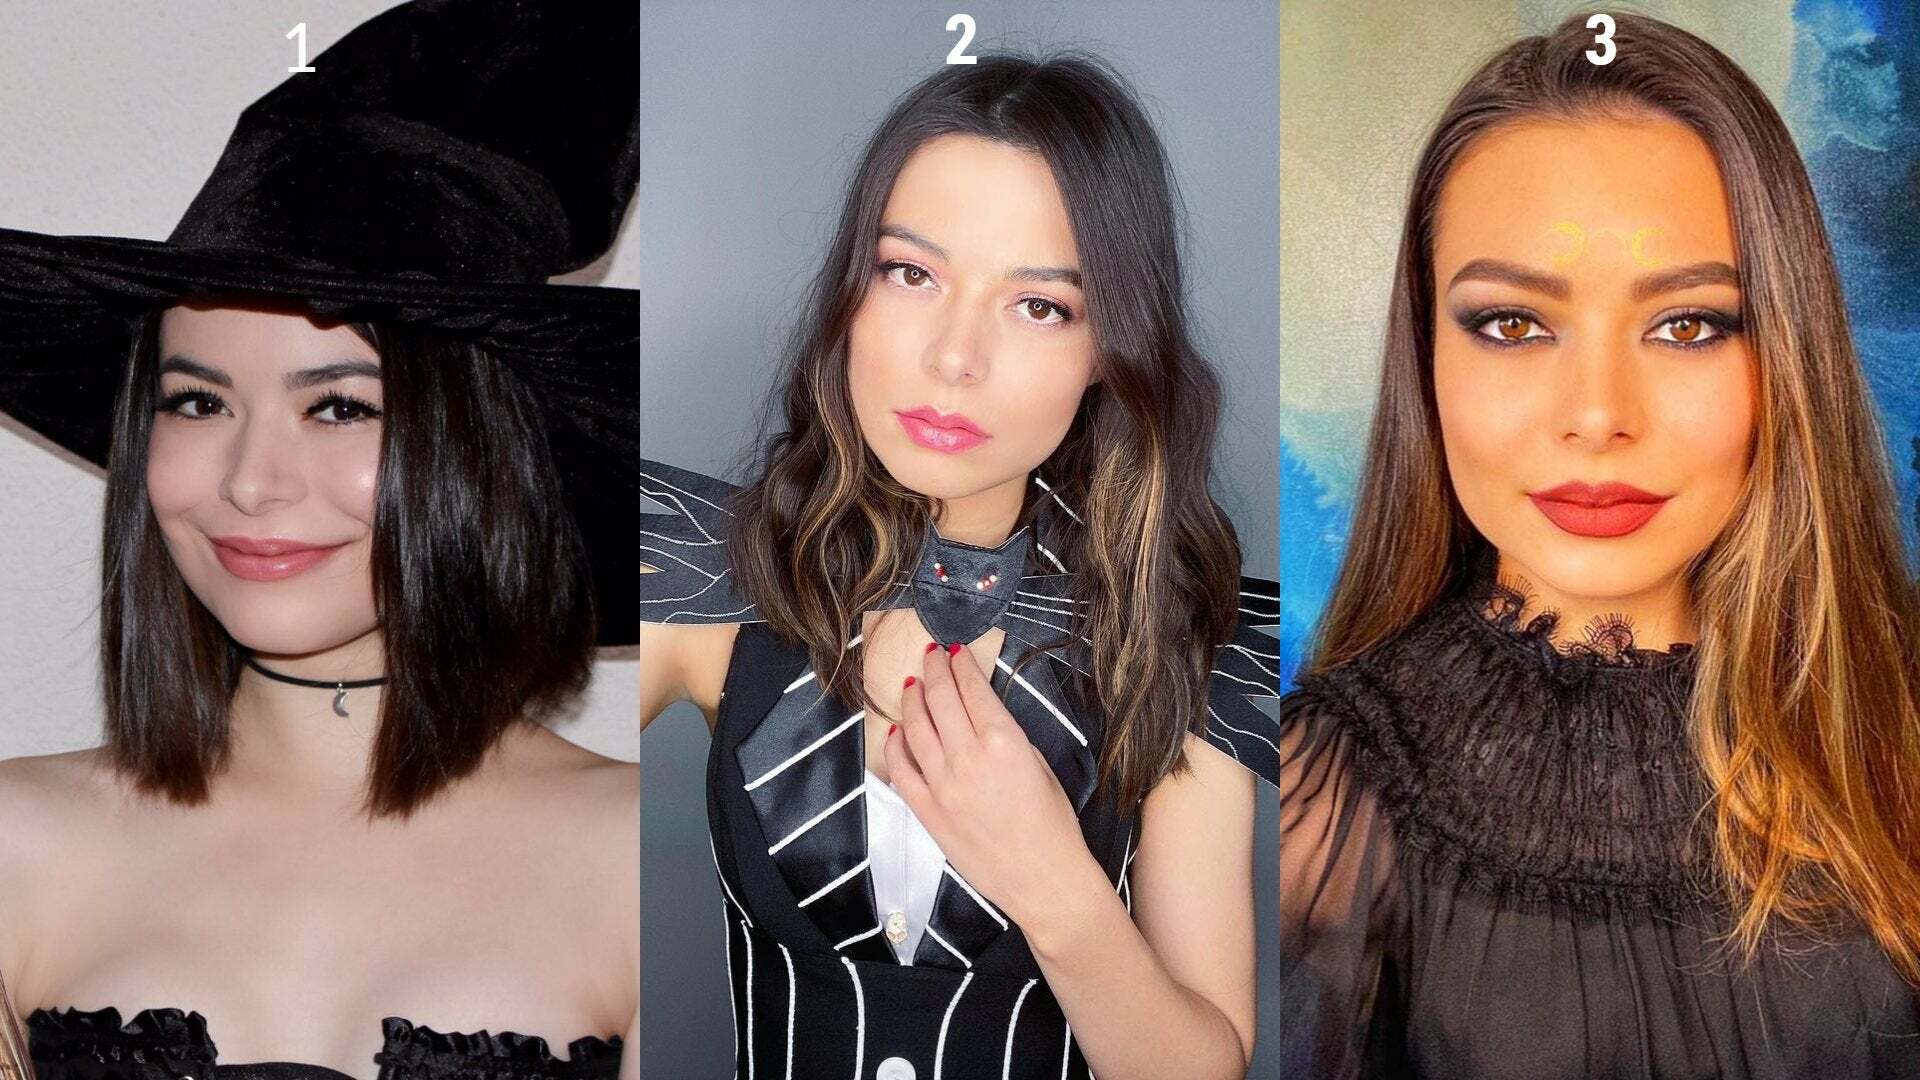 in which Halloween costume would you fuck Miranda Cosgrove and how would you fuck her?